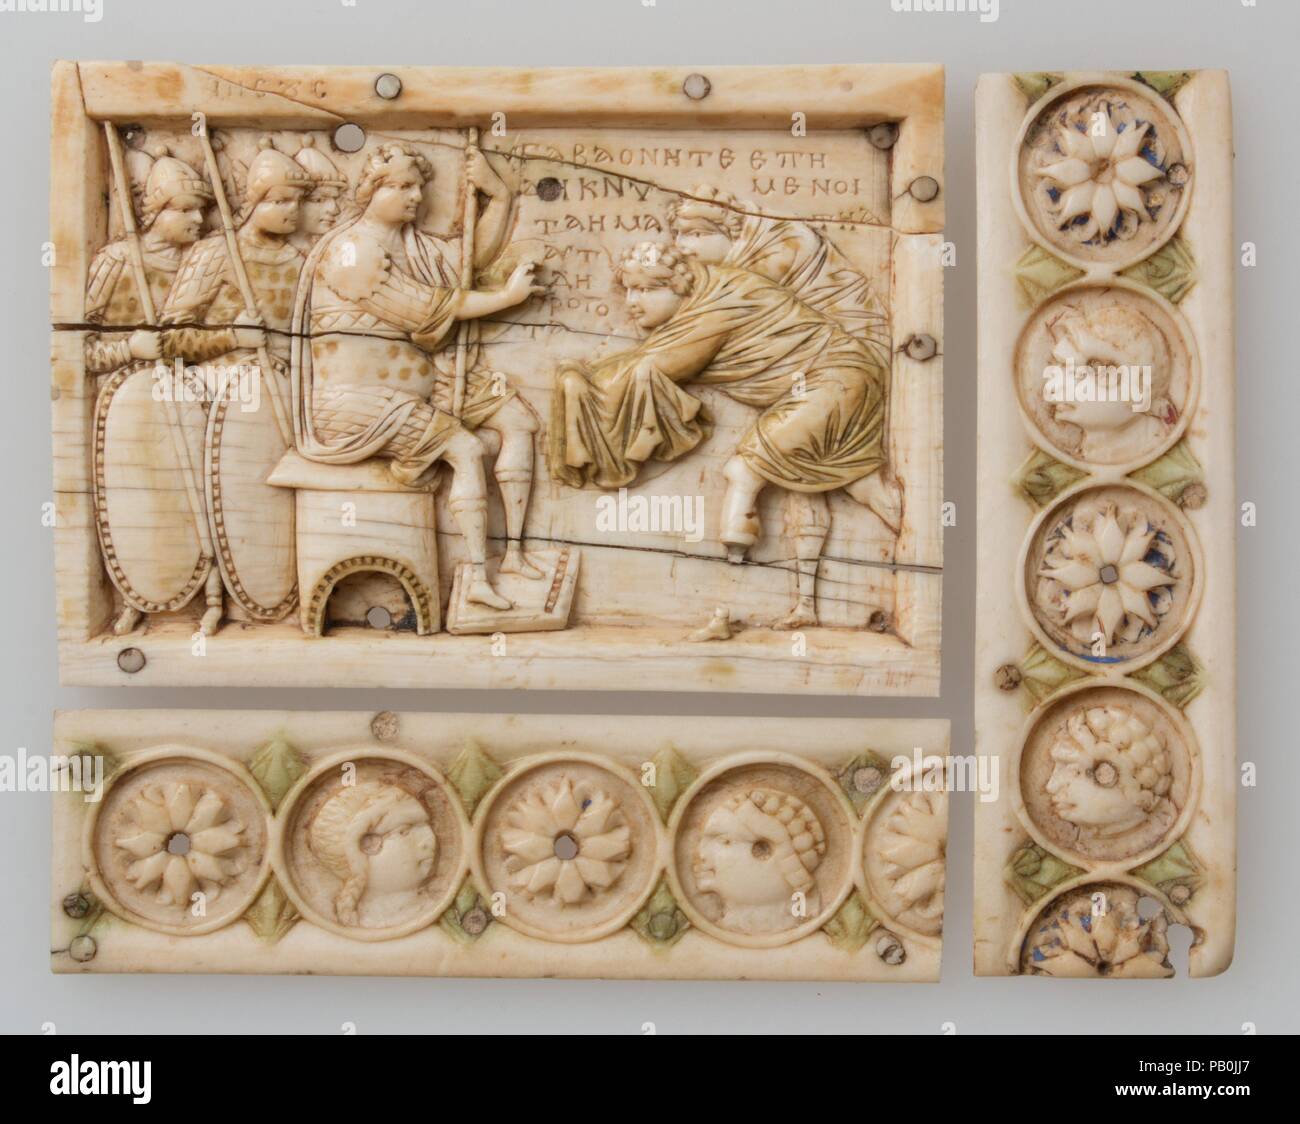 Plaque with Scenes from the Story of Joshua. Culture: Byzantine. Dimensions: a: 2 1/2 x 3 9/16 x 1/4 in. (6.3 x 9 x 0.6 cm)  b: 1 1/16 x 3 9/16 x 1/16 in. (2.7 x 9.1 x 0.2 cm)  c: 3 5/8 x 1 x 1/16 in. (9.2 x 2.6 x 0.2 cm). Date: 900-1000.  These panels are from a casket that illustrated Joshua's conquest of the Promised Land and carry paraphrasings of texts from the Book of Joshua. The first narrative panel, designed to fit a lock plate, shows the capture of the city of Ai and is inscribed, 'And Joshua stretched out his hand toward the city and they rose up quickly and they slew all' (Joshua 8 Stock Photo